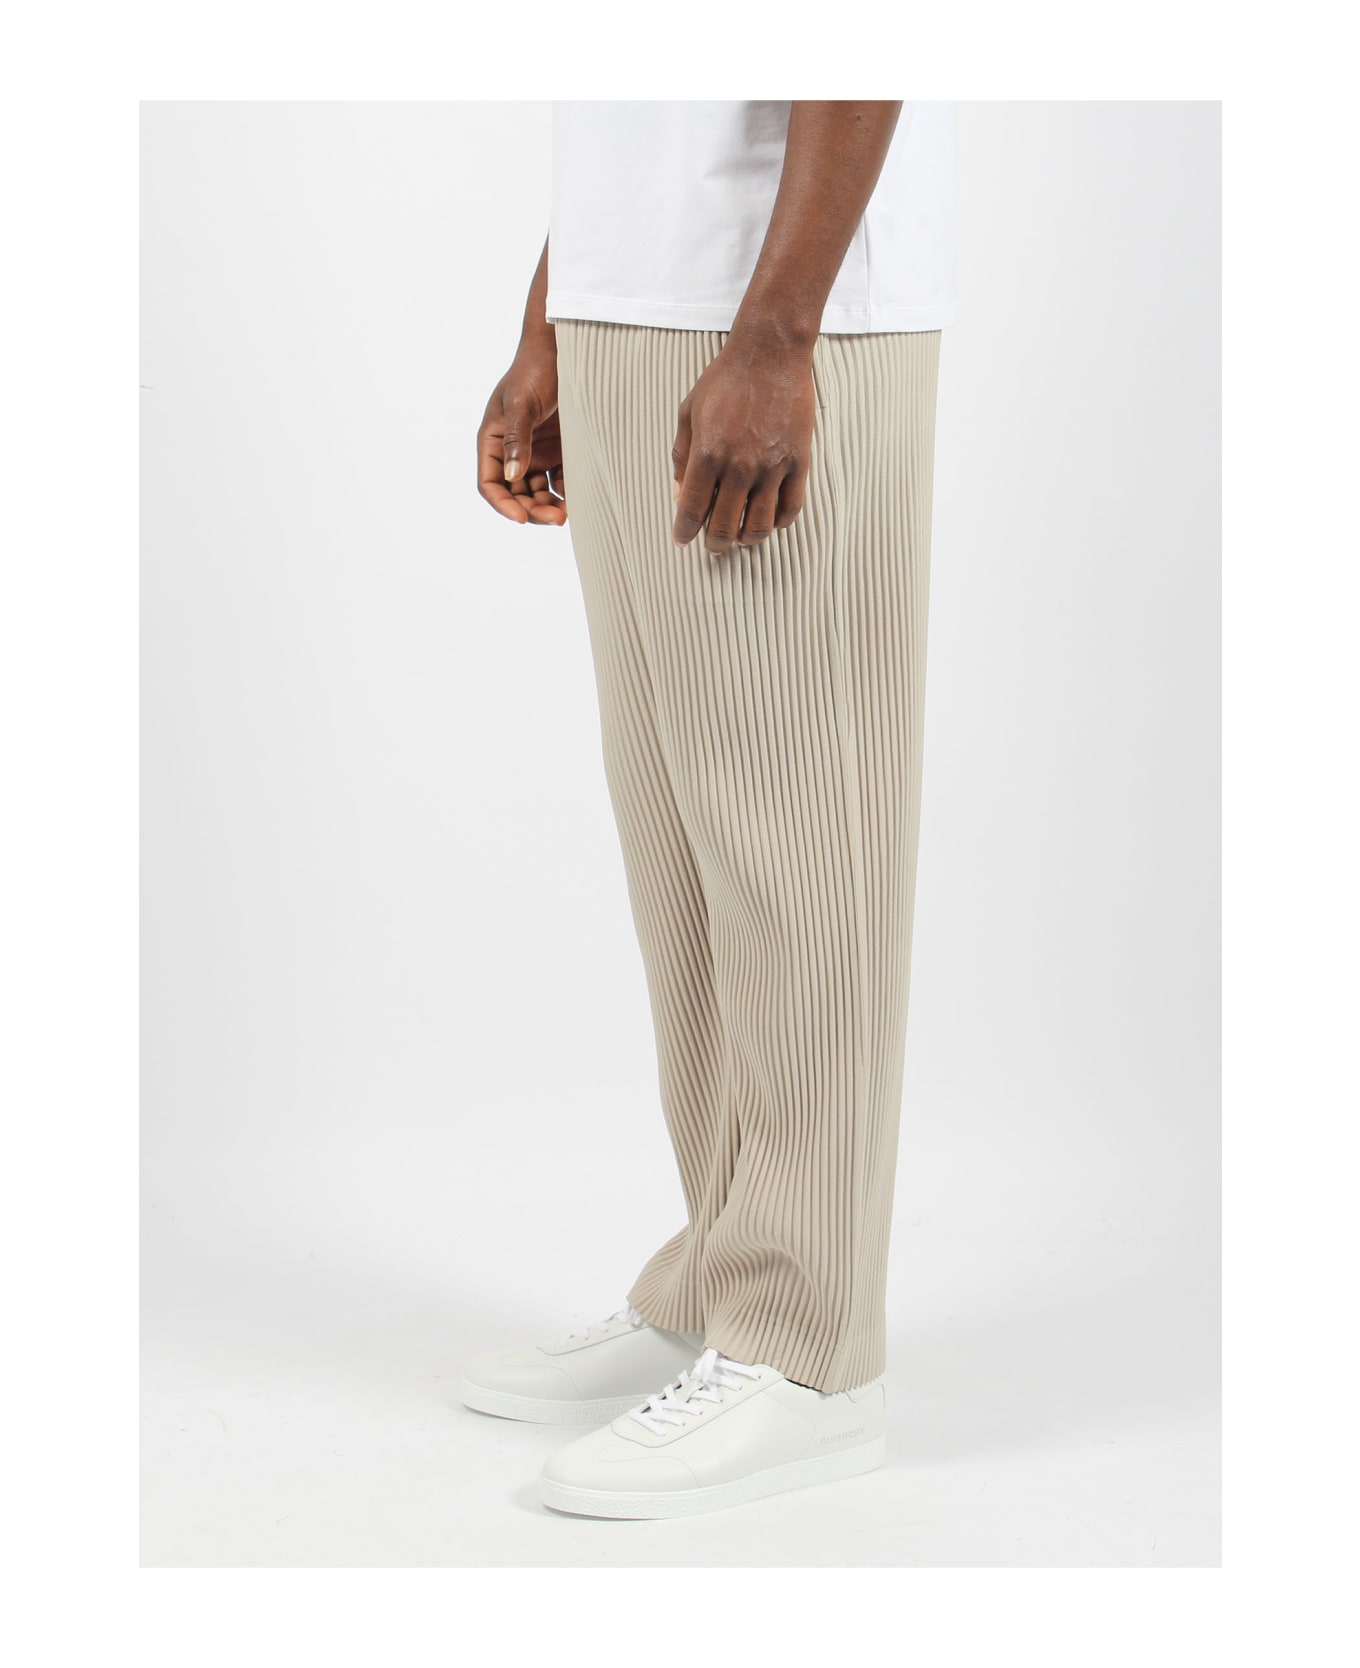 Homme Plissé Issey Miyake Mc March Trousers - Beige ボトムス